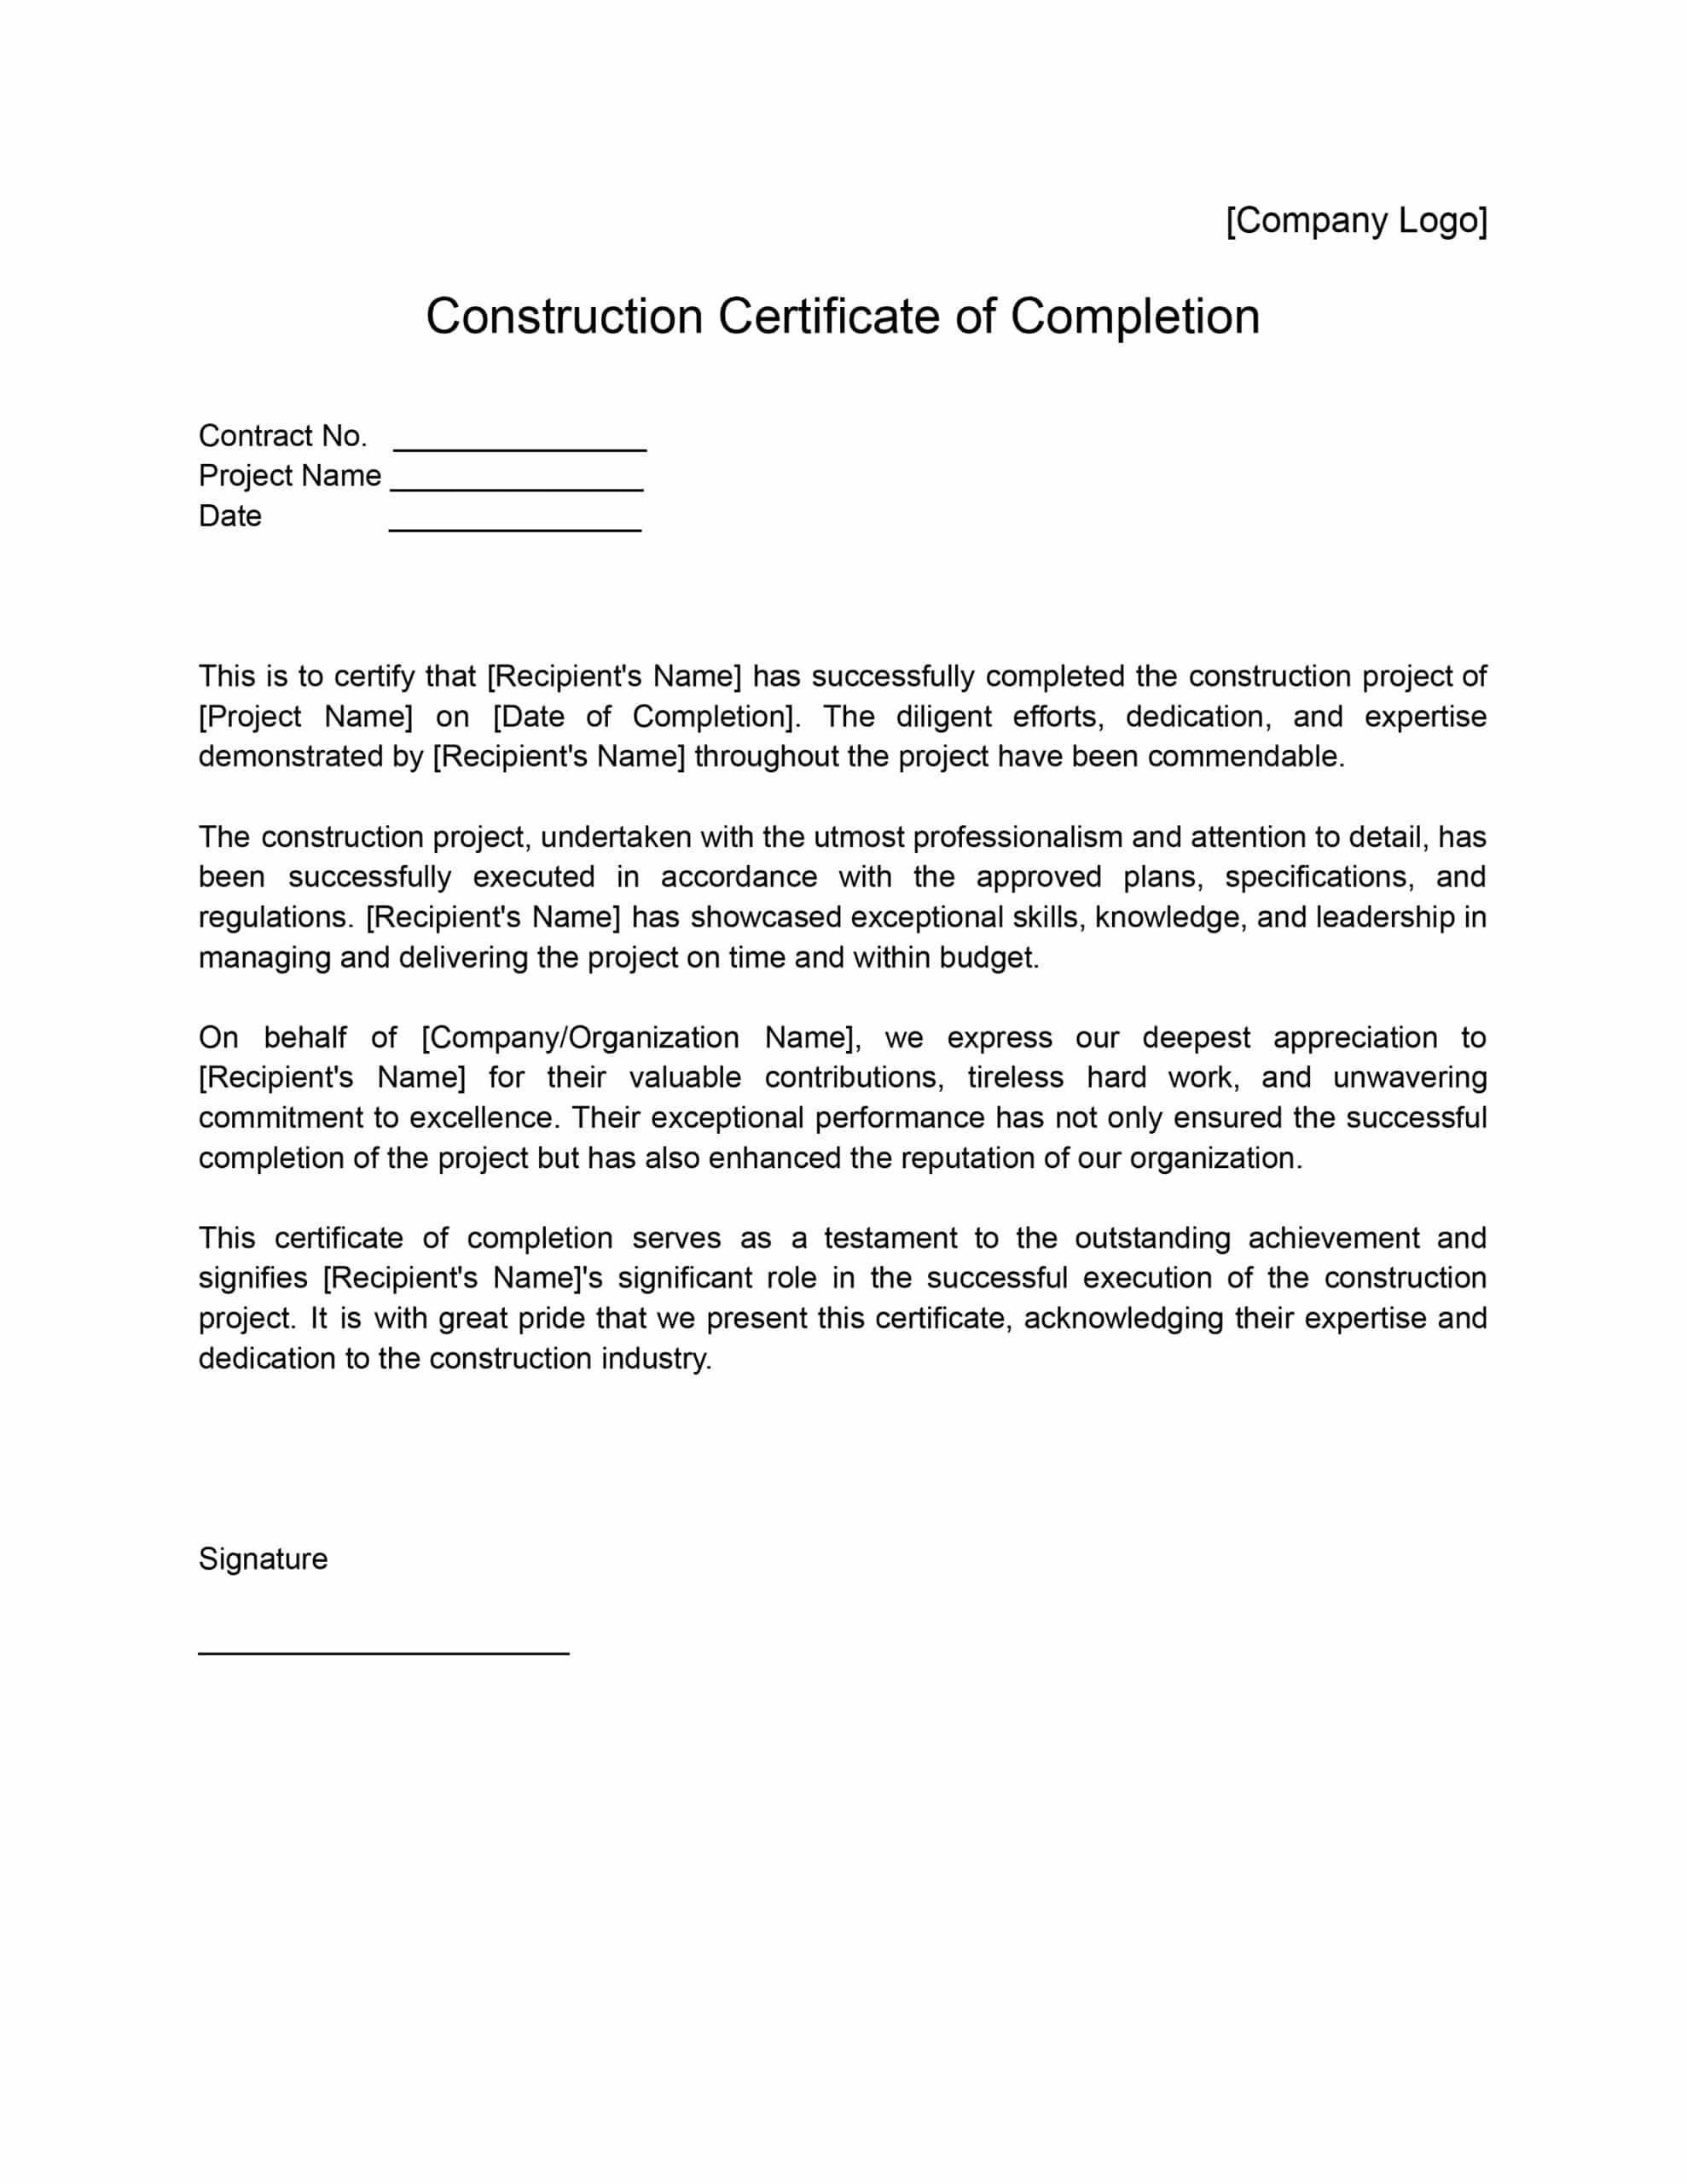 construction-certificate-of-completion-templates